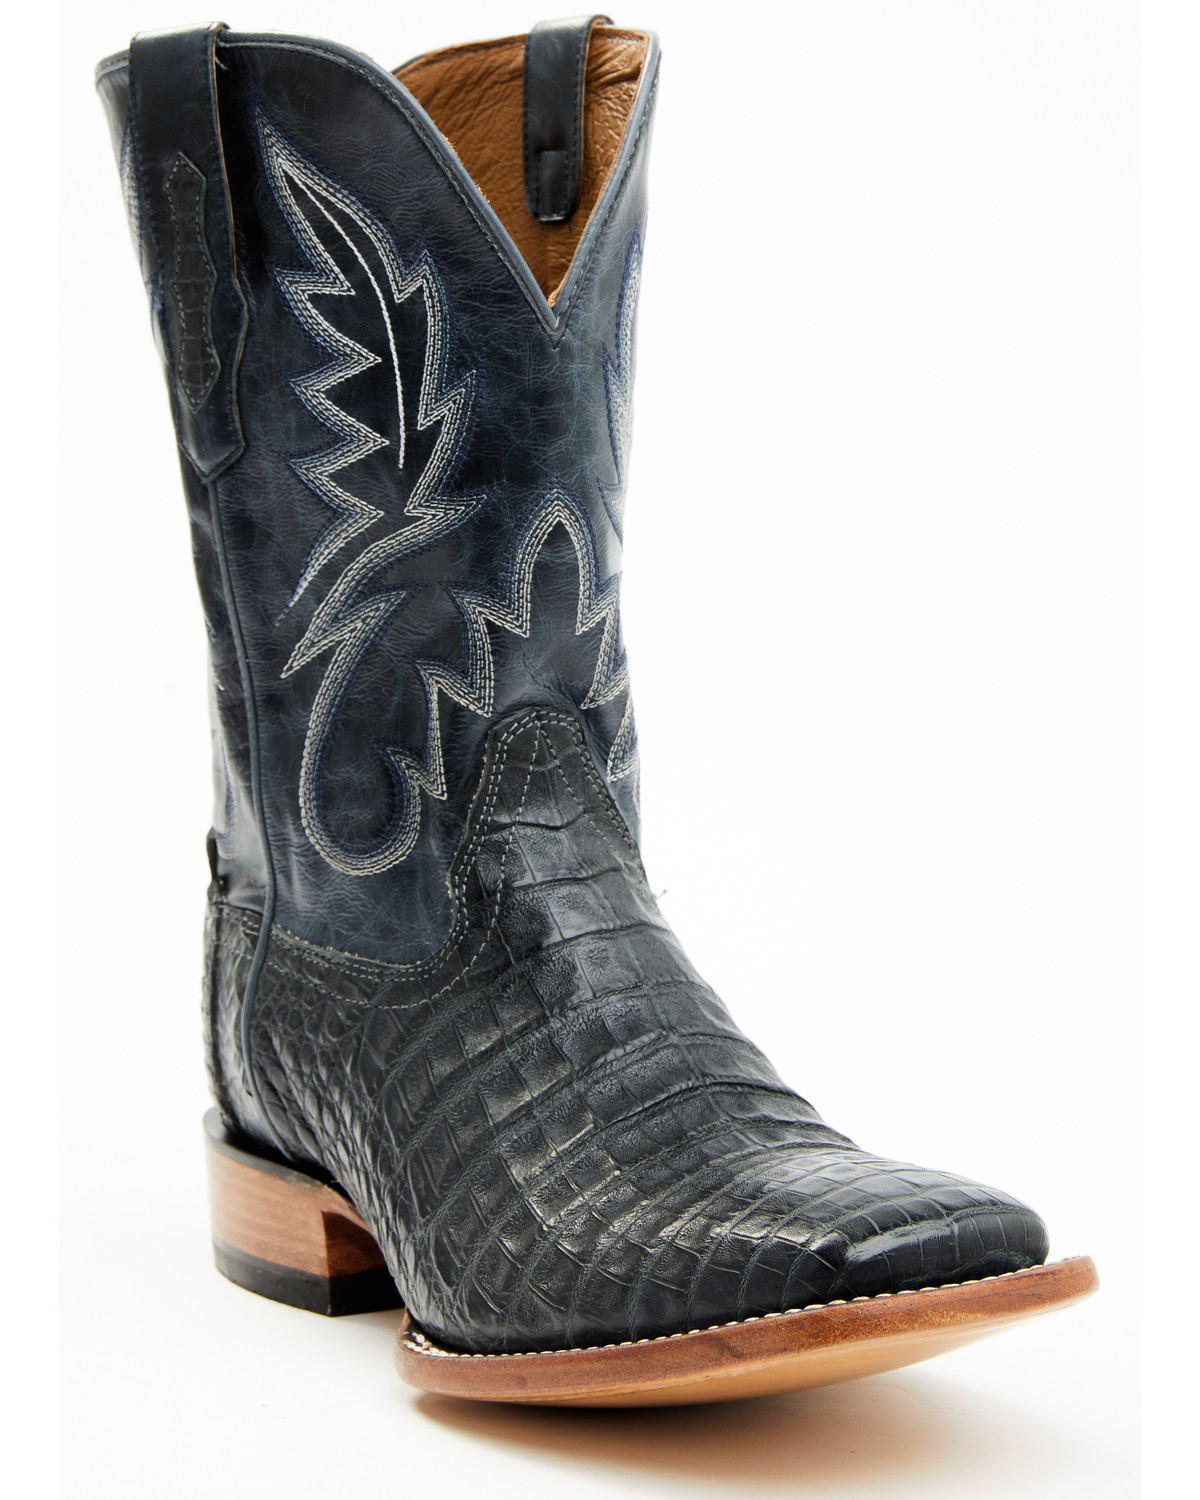 Cody James Men's Exotic Caiman Belly Western Boots - Broad Square Toe